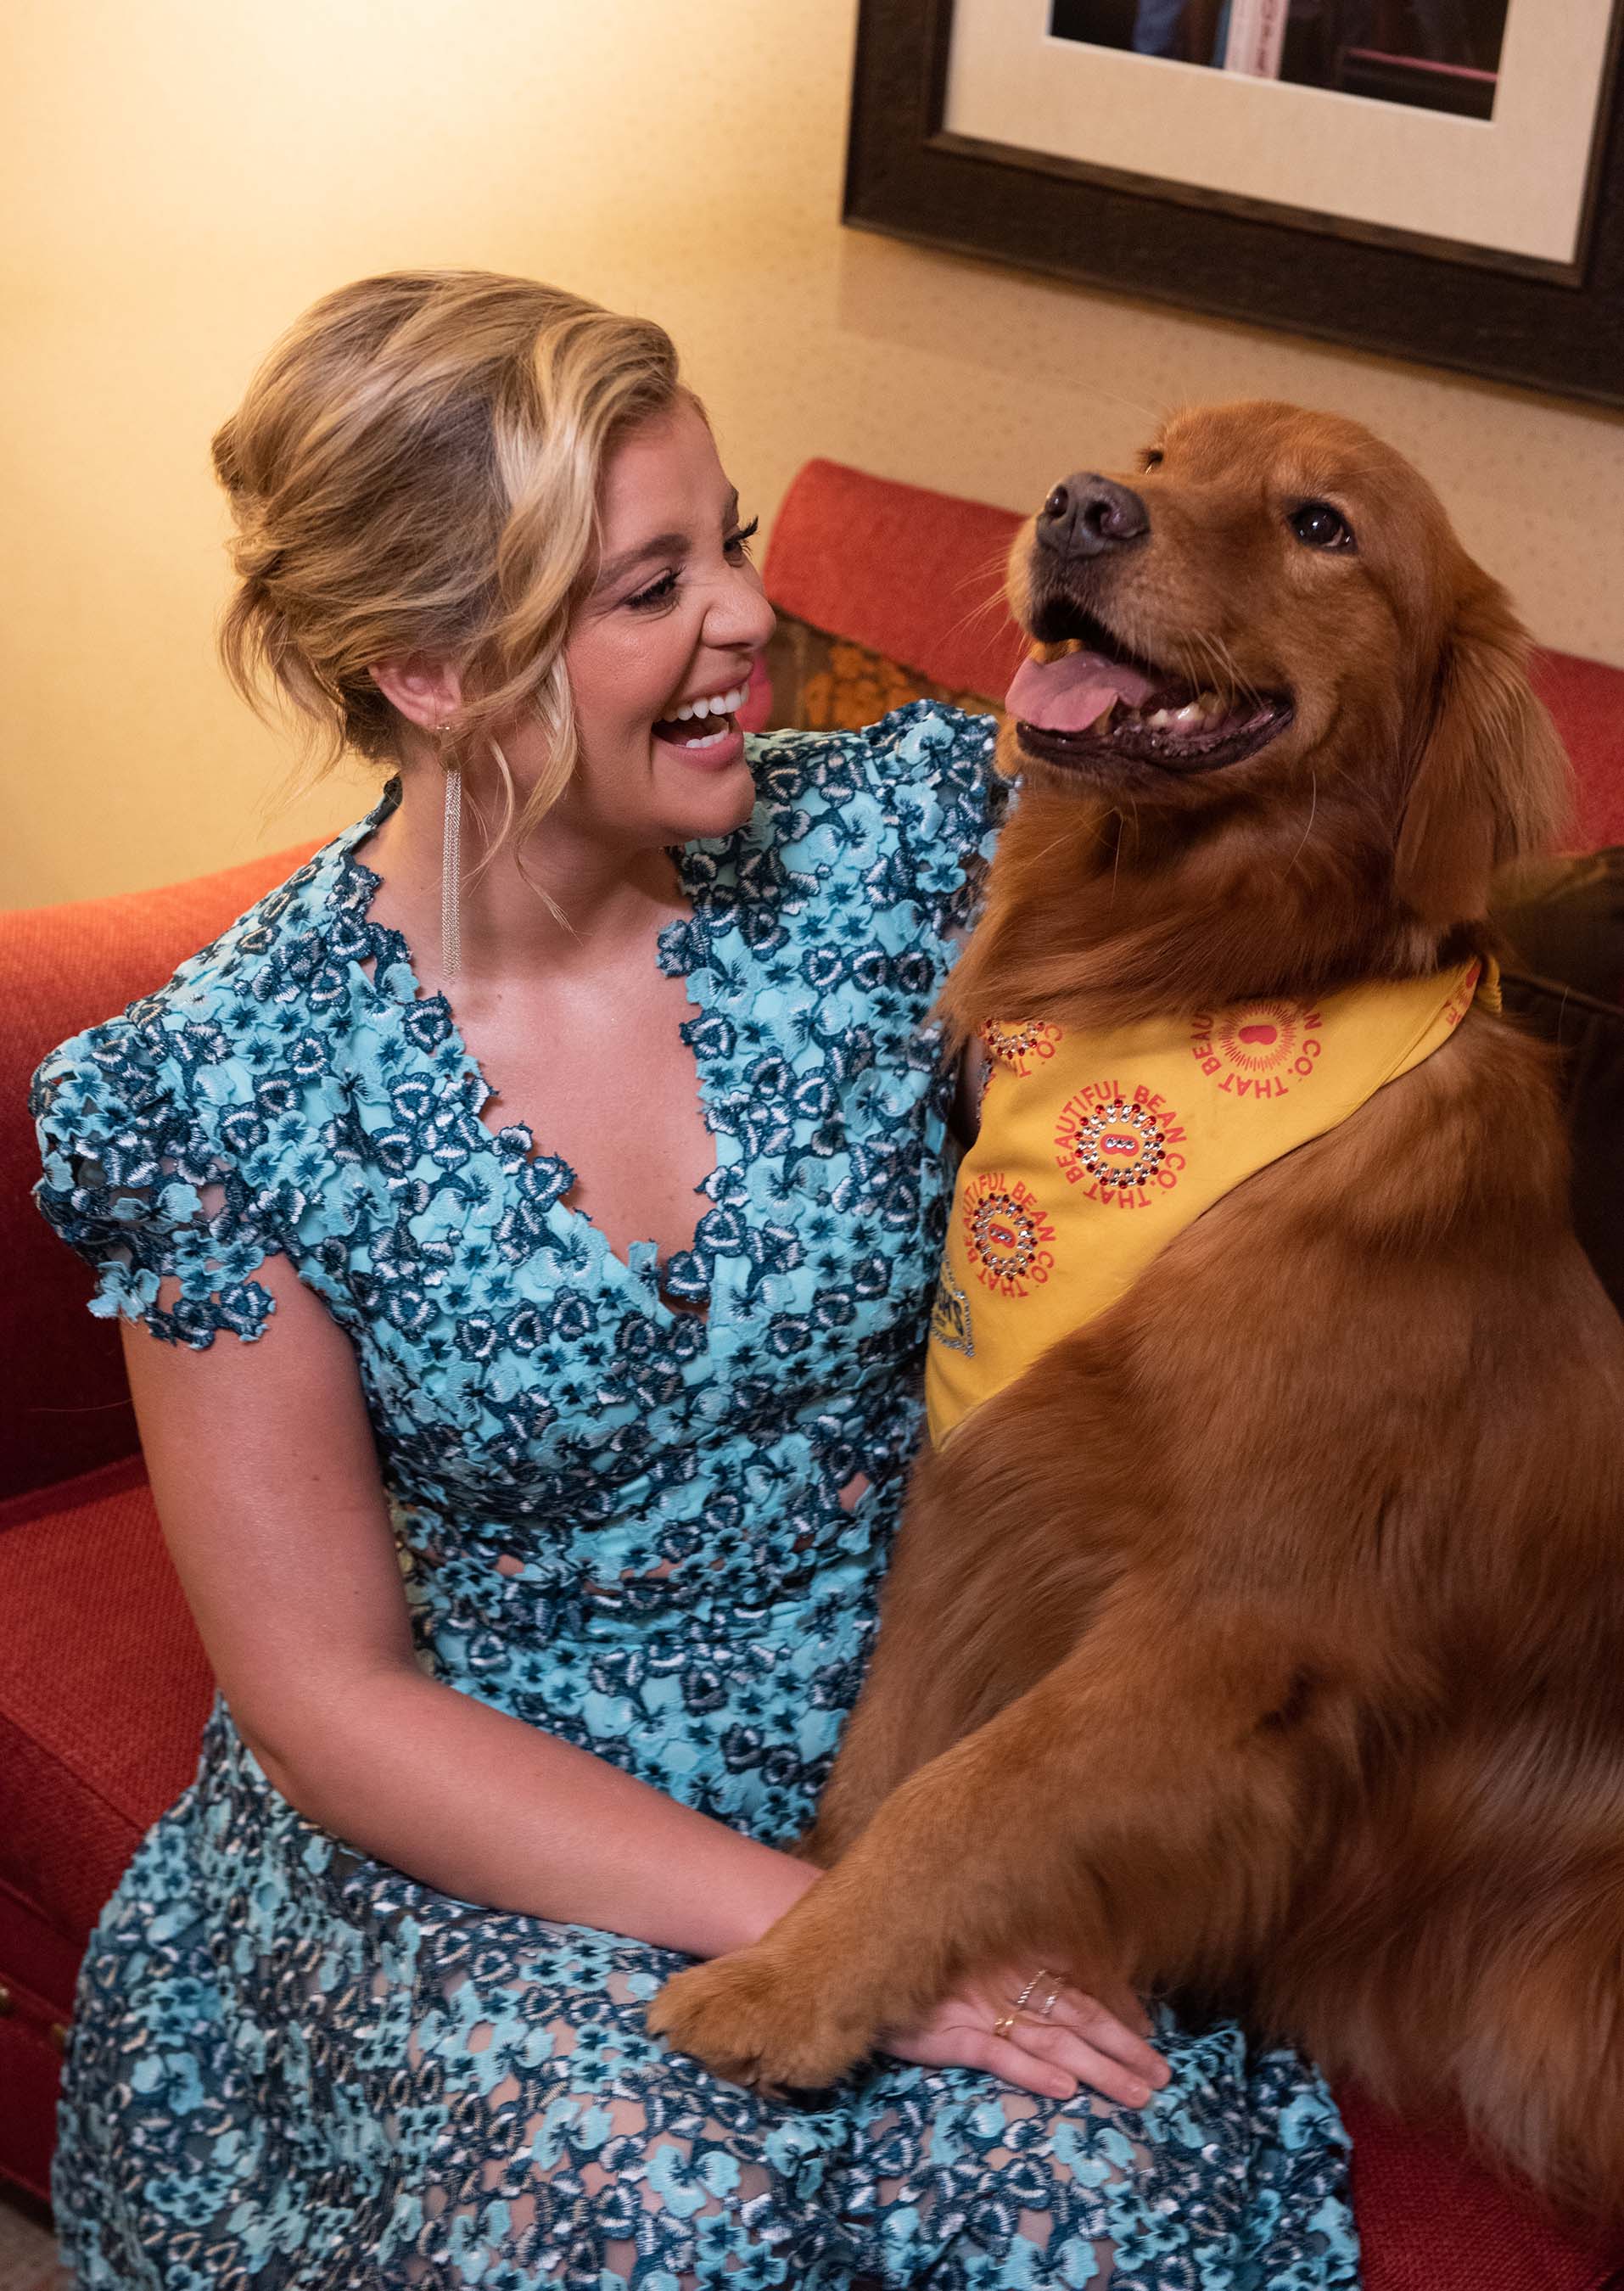 Duke, Bush’s® beloved spokes-dog, made his historic debut at the Grand Ole Opry – the second dog in history – with the help of multi-platinum selling singer/songwriter and Opry member, Lauren Alaina.